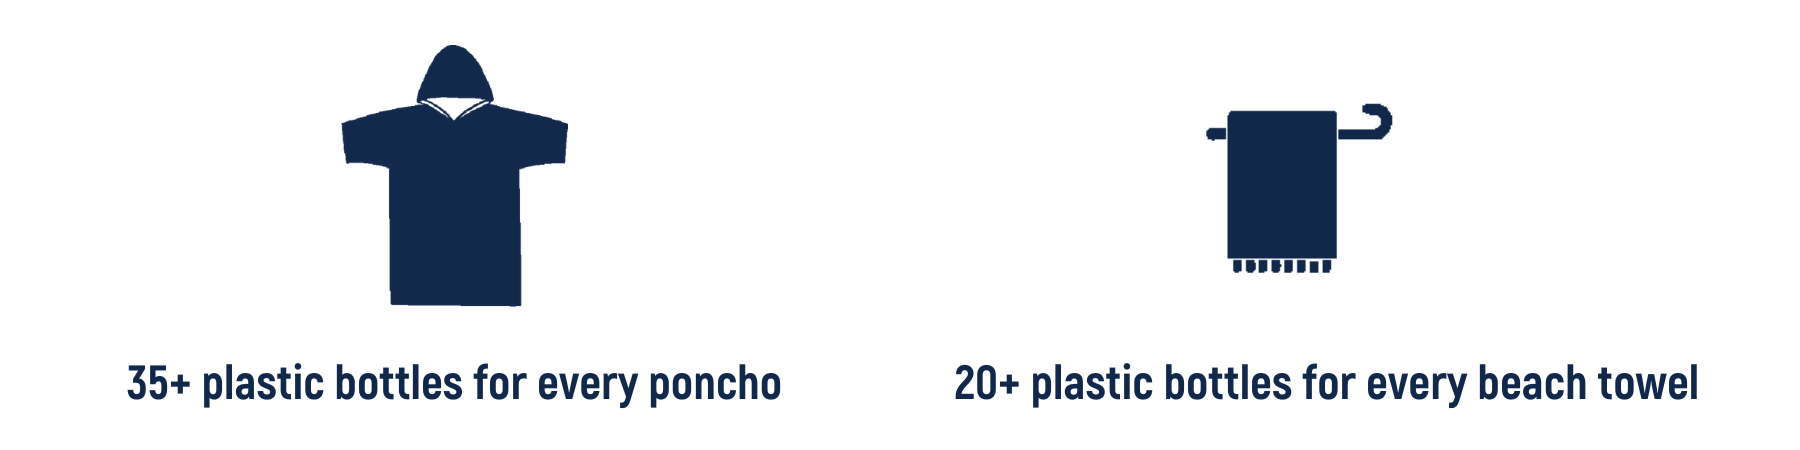 35+ plastic bottles recycled for every hooded poncho and 20+ plastic bottles recycled for every beach towel